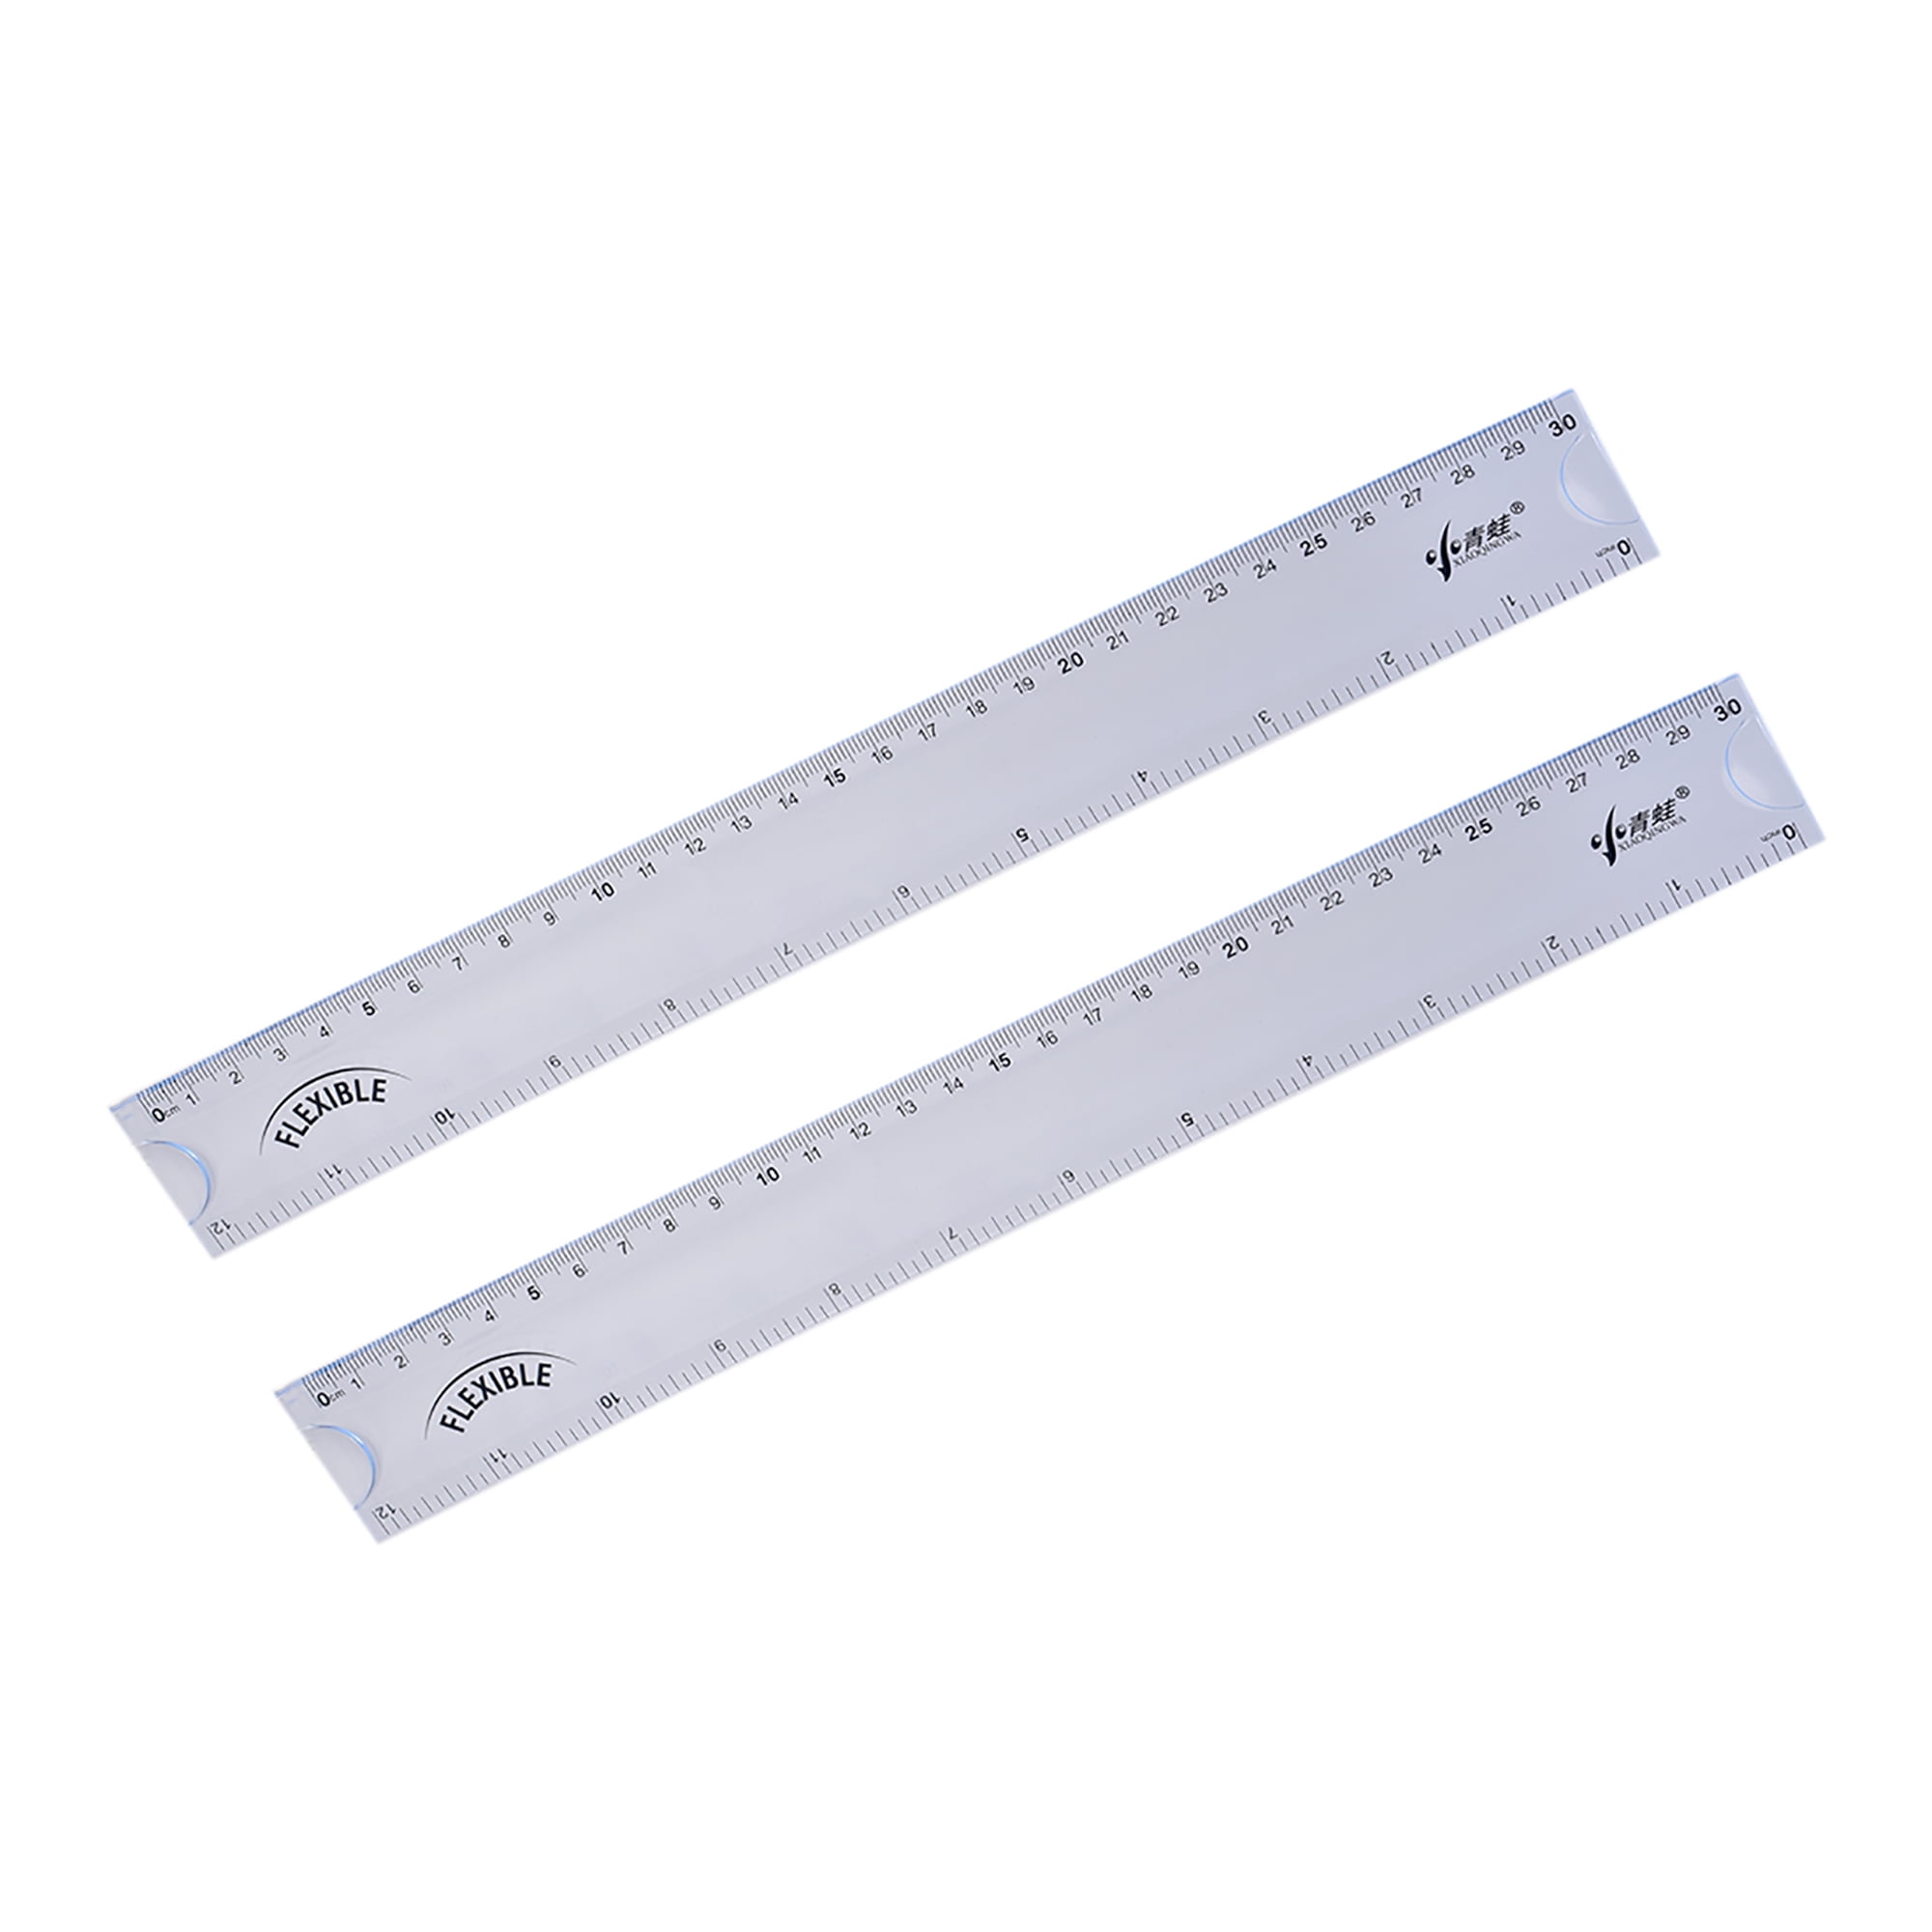 Students Studying Drawing Straight Ruler Measuring Tool 30cm Range Clear